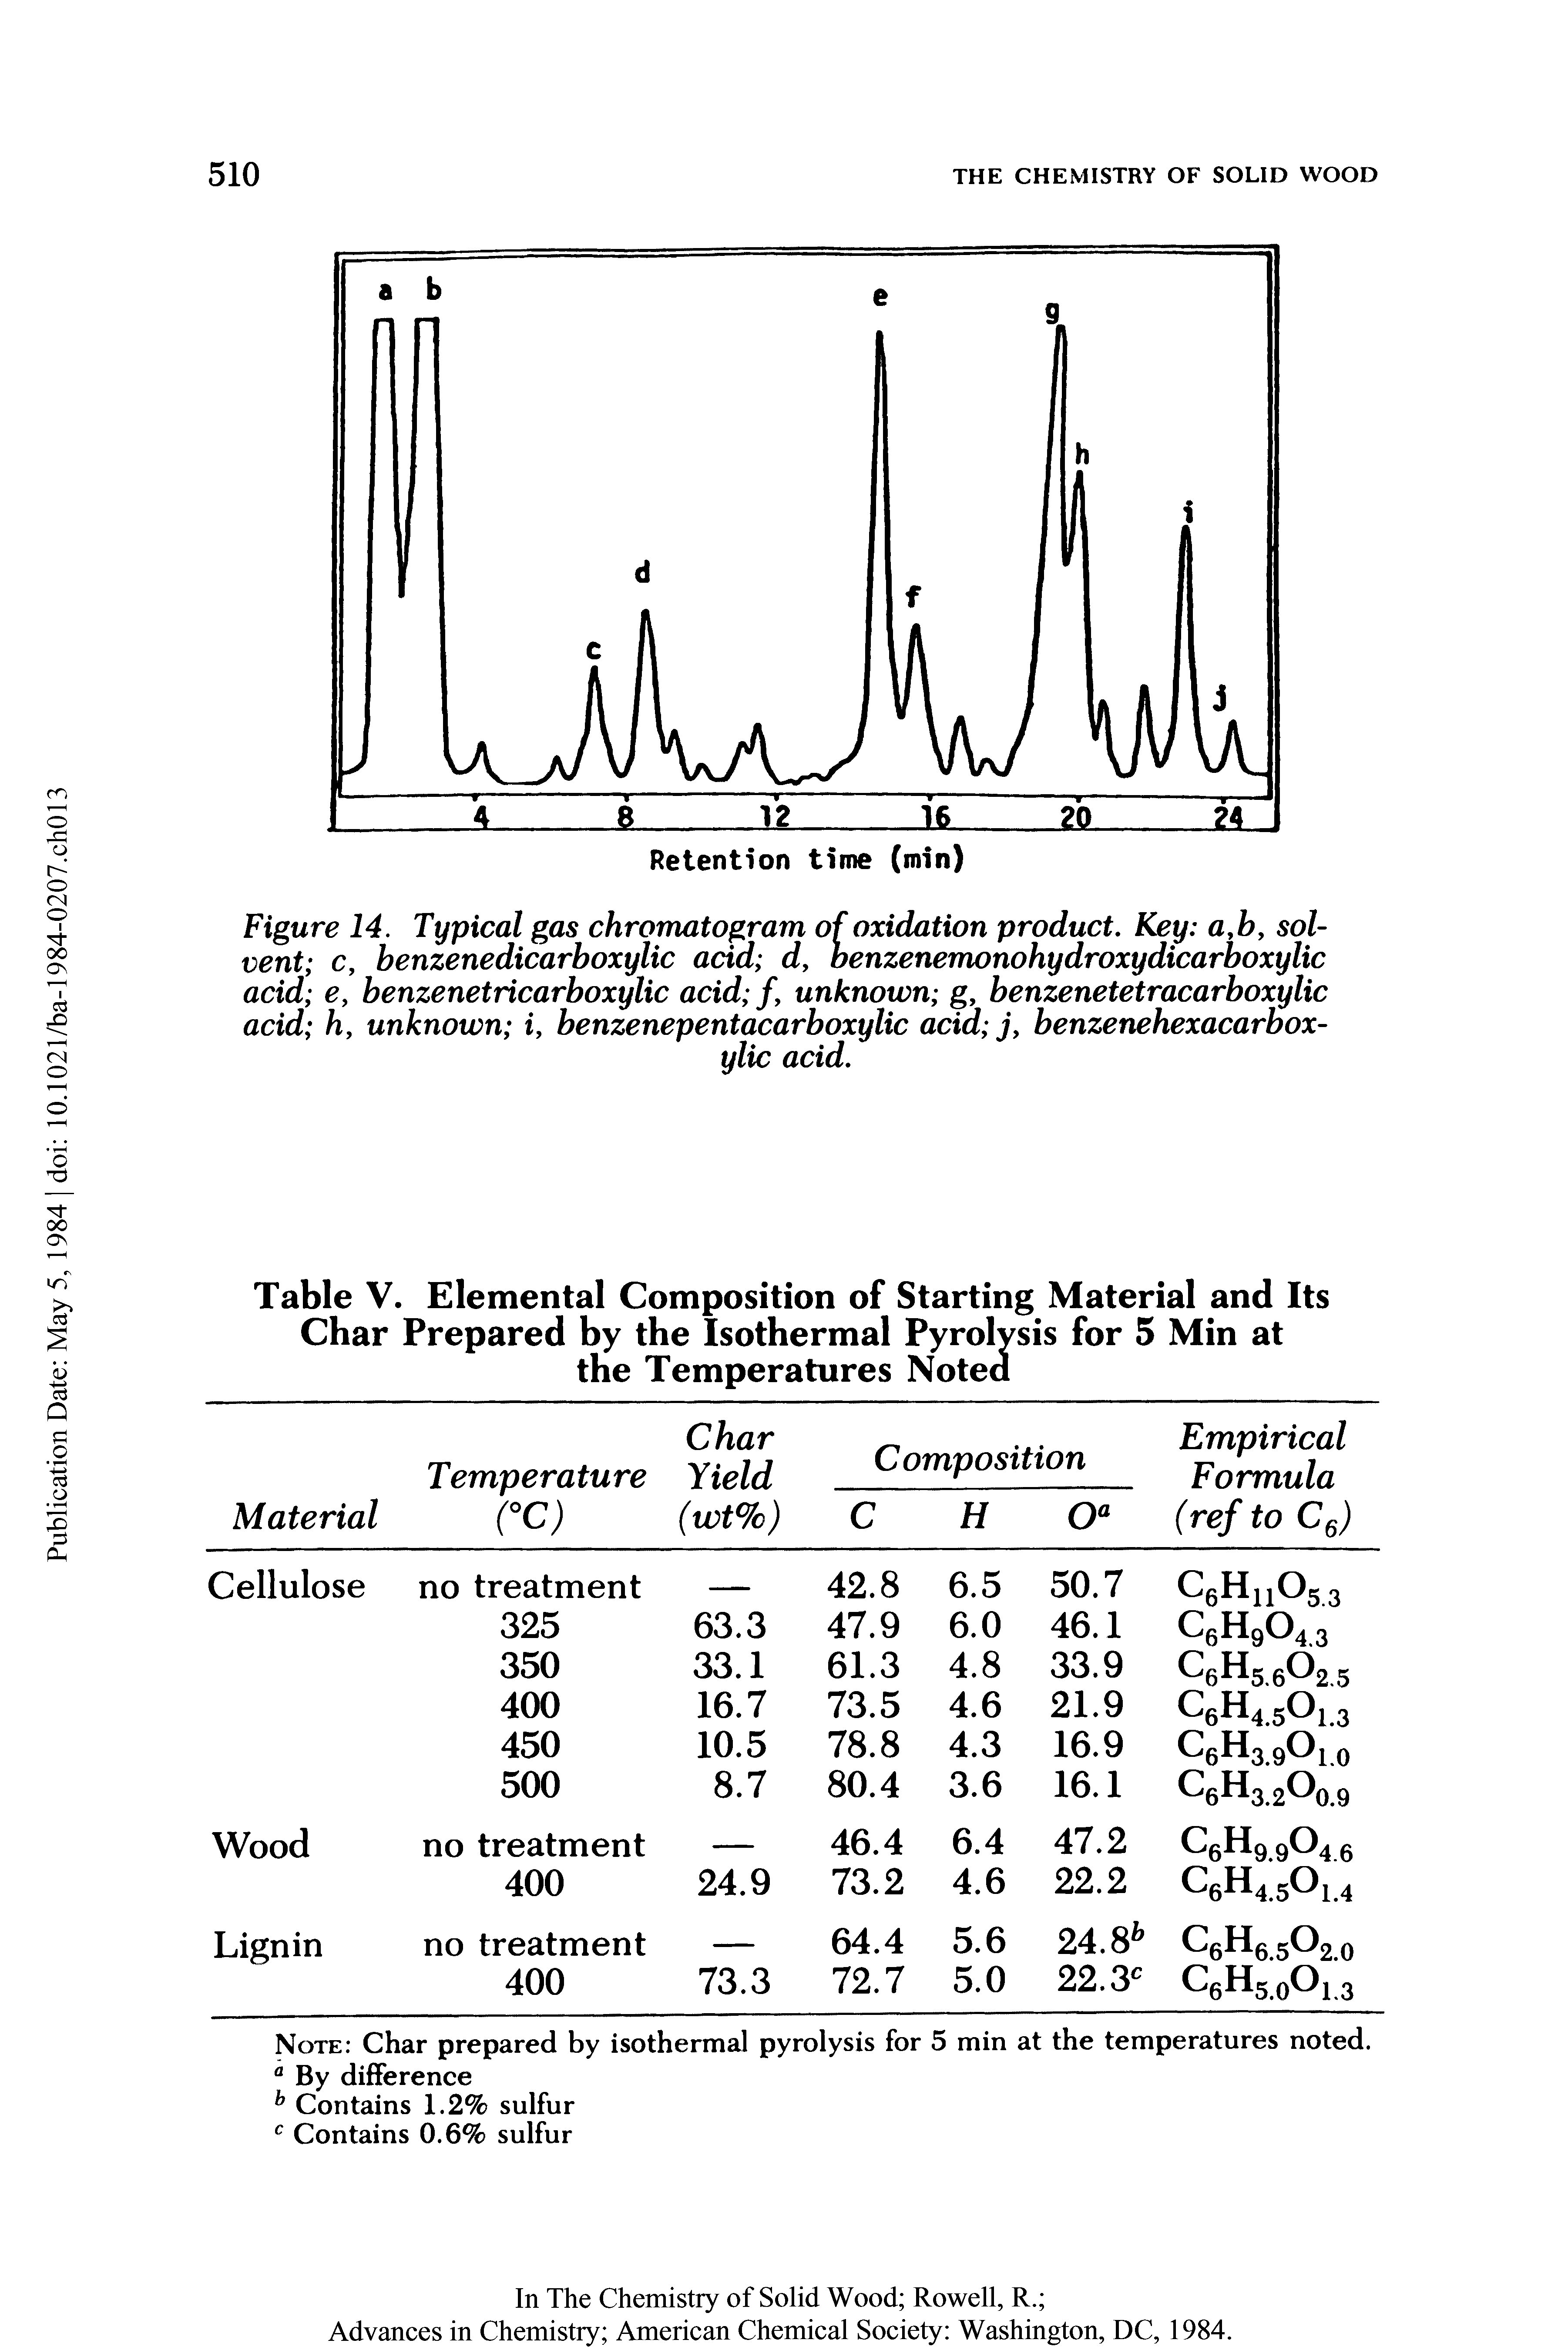 Figure 14. Typical gas chromatogram of oxidation product. Key a,by solvent c, benzenedicarboxylic acid d, benzenemonohydroxydicarboxylic acid e, benzenetricarboxylic acid /, unknown g, benzenetetracarboxylic acid h, unknown i, benzenepentacarboxylic acid benzenehexacarbox-...